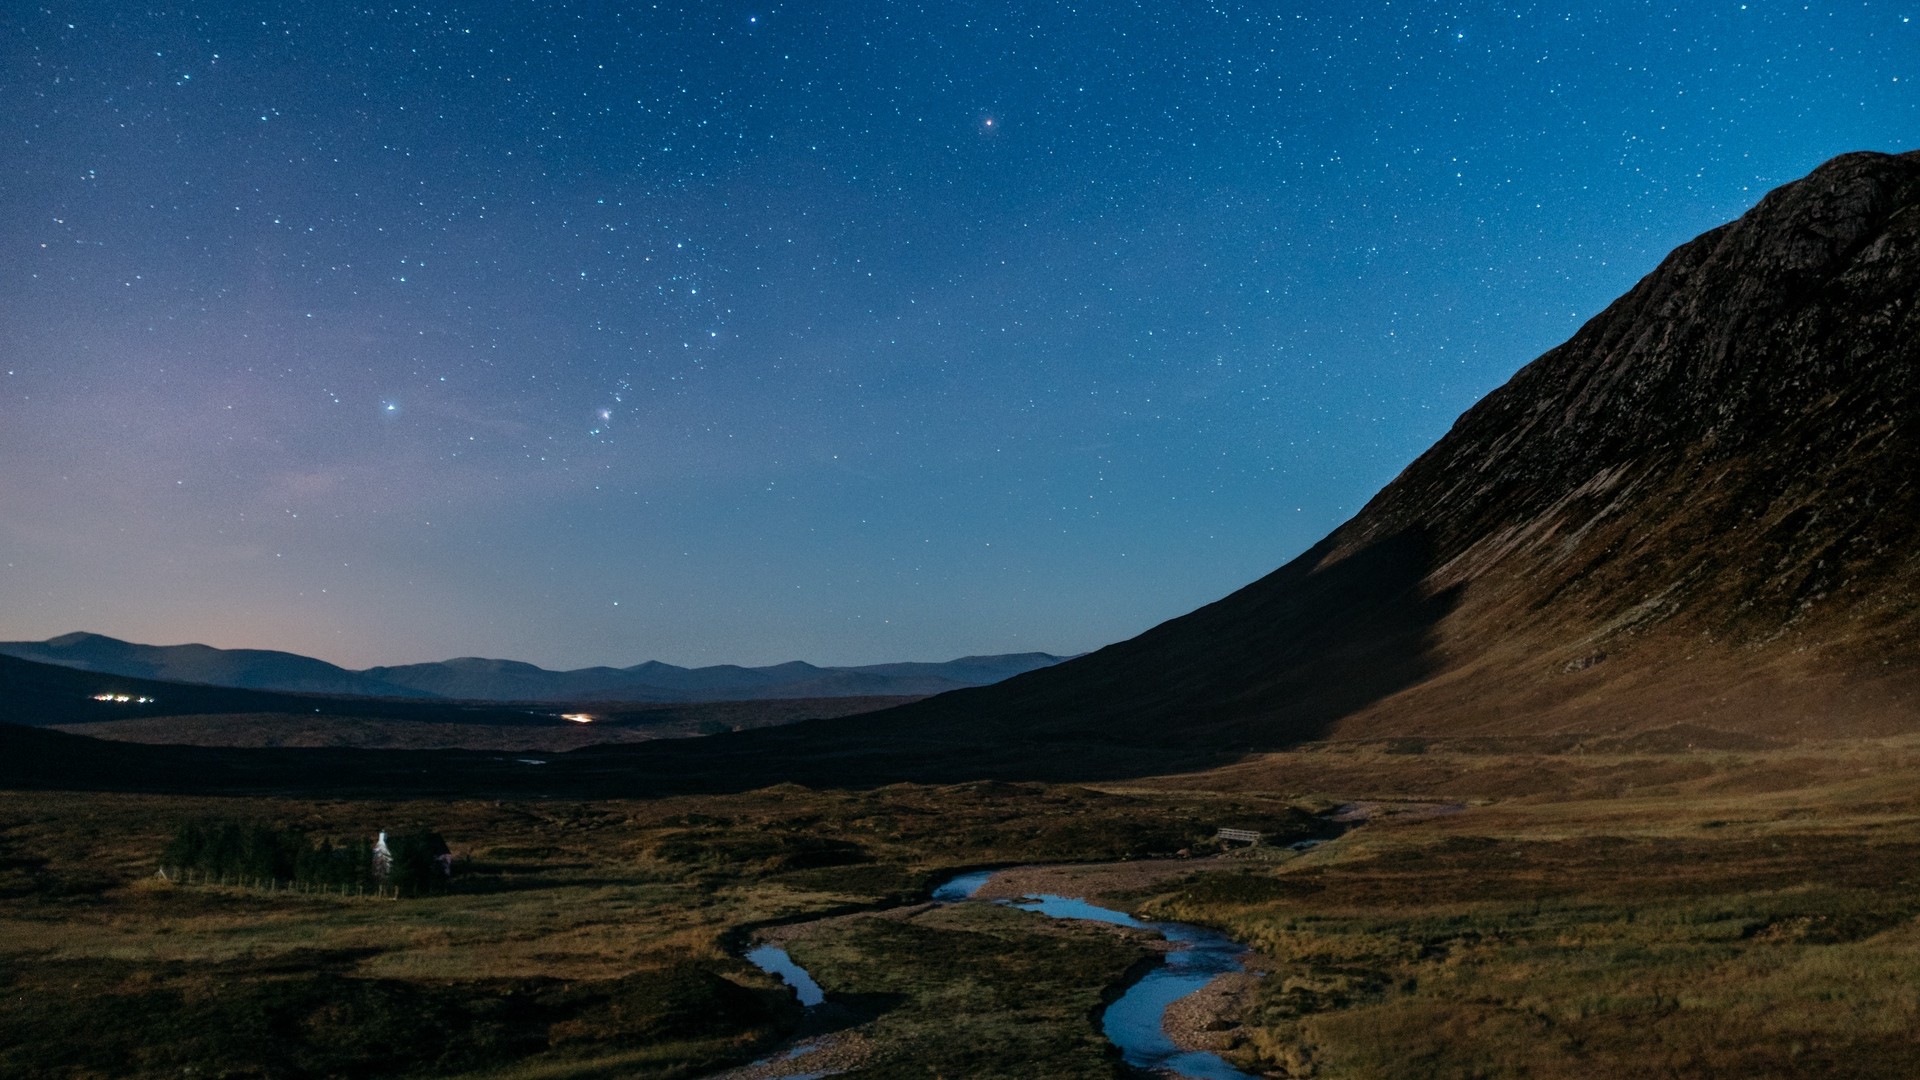 1920x1080 wallpapers: starry sky, river, hills, sky (image)